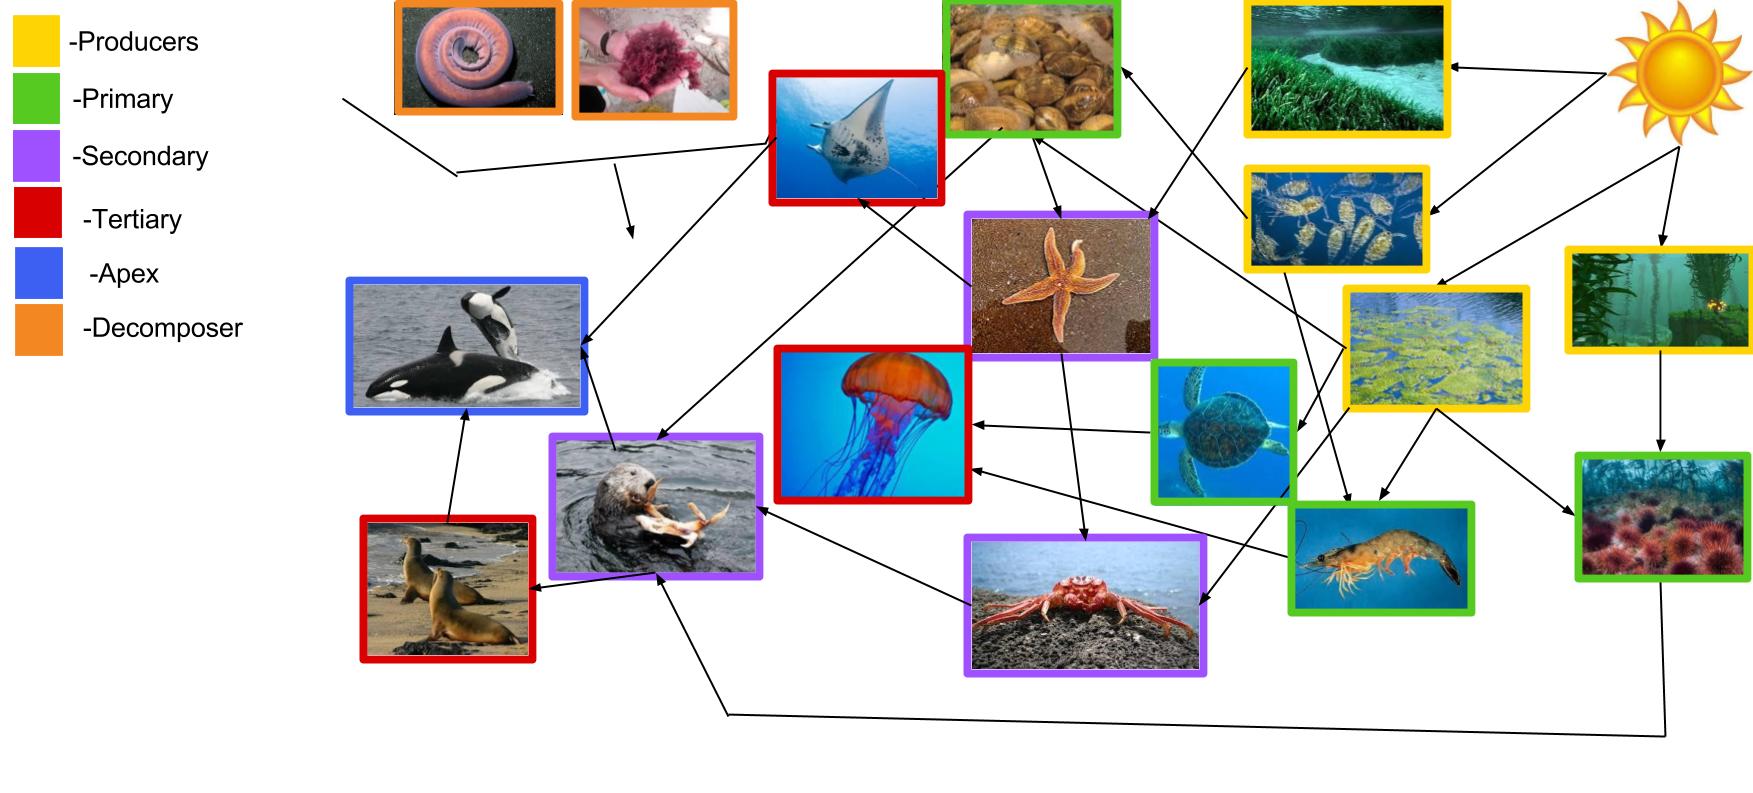 Food Web - The World of the Sea Otter